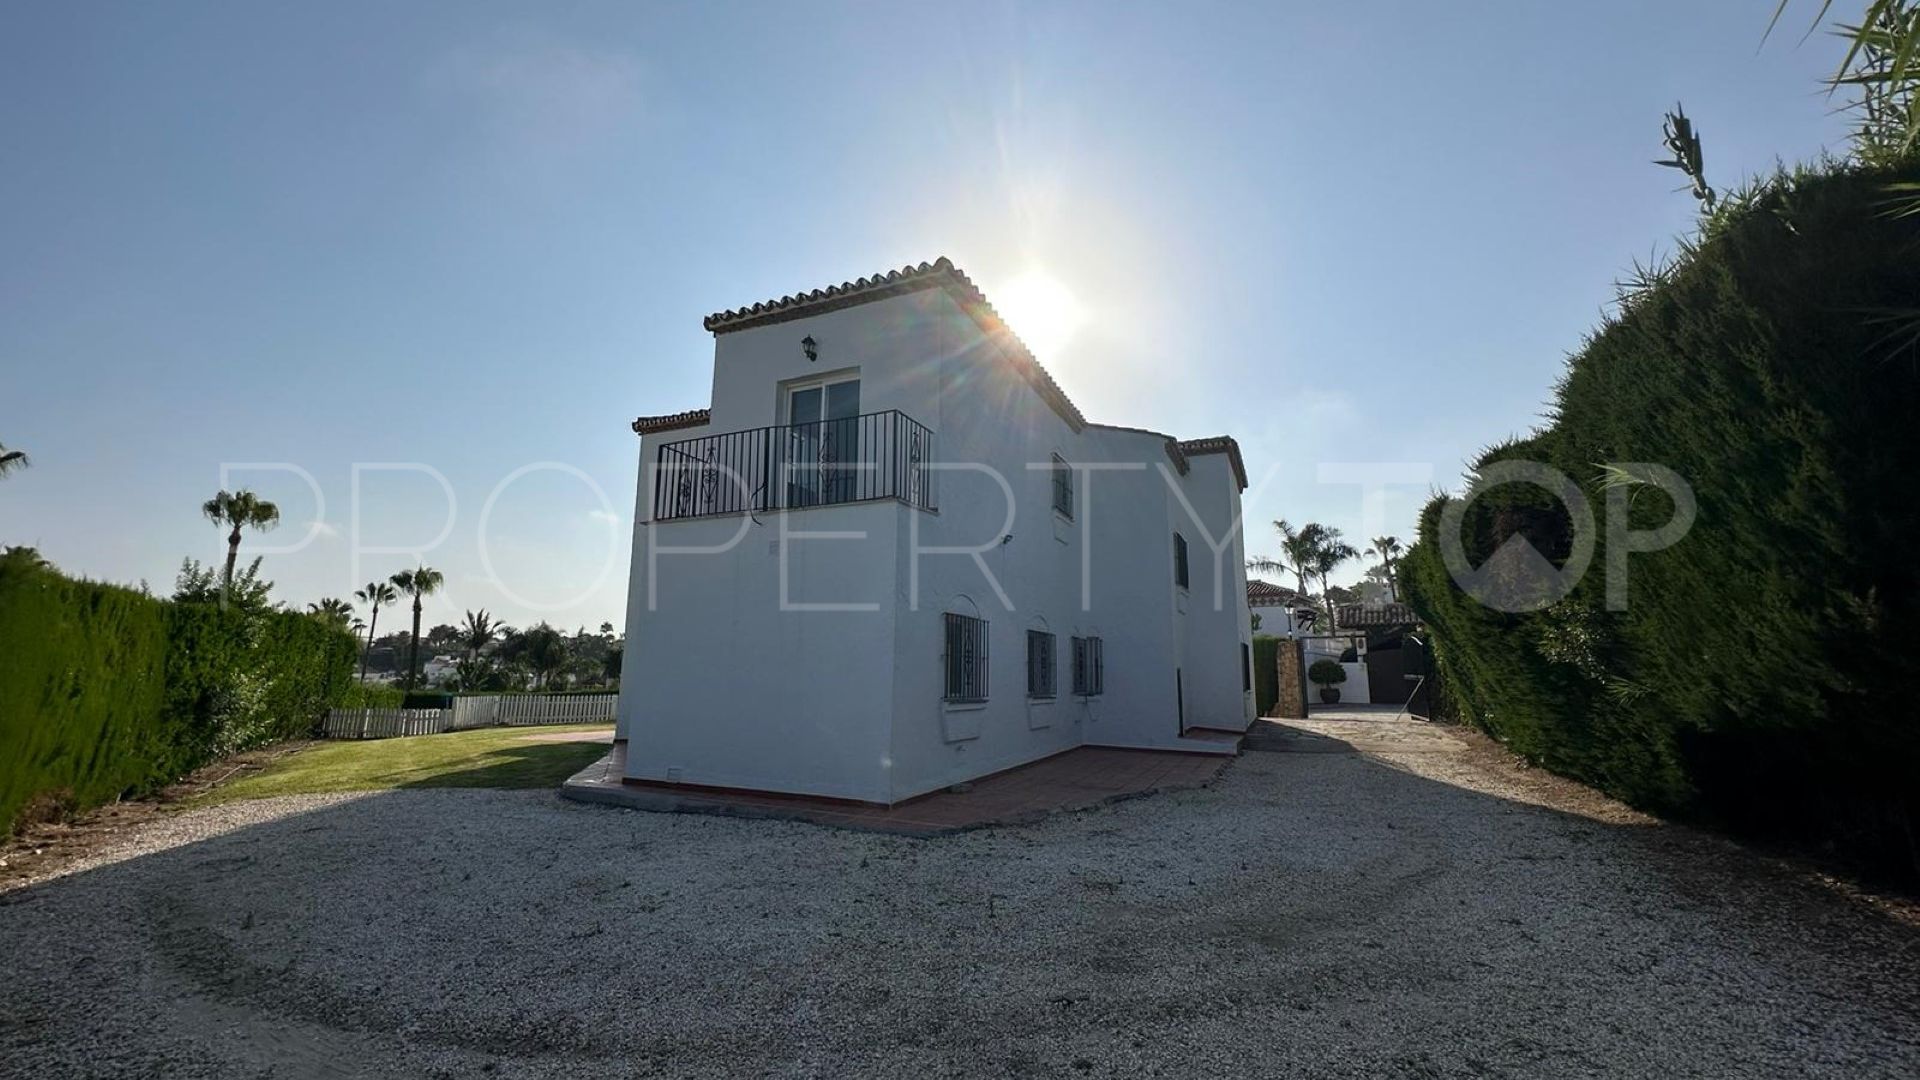 Villa with 5 bedrooms for sale in Marbella Country Club